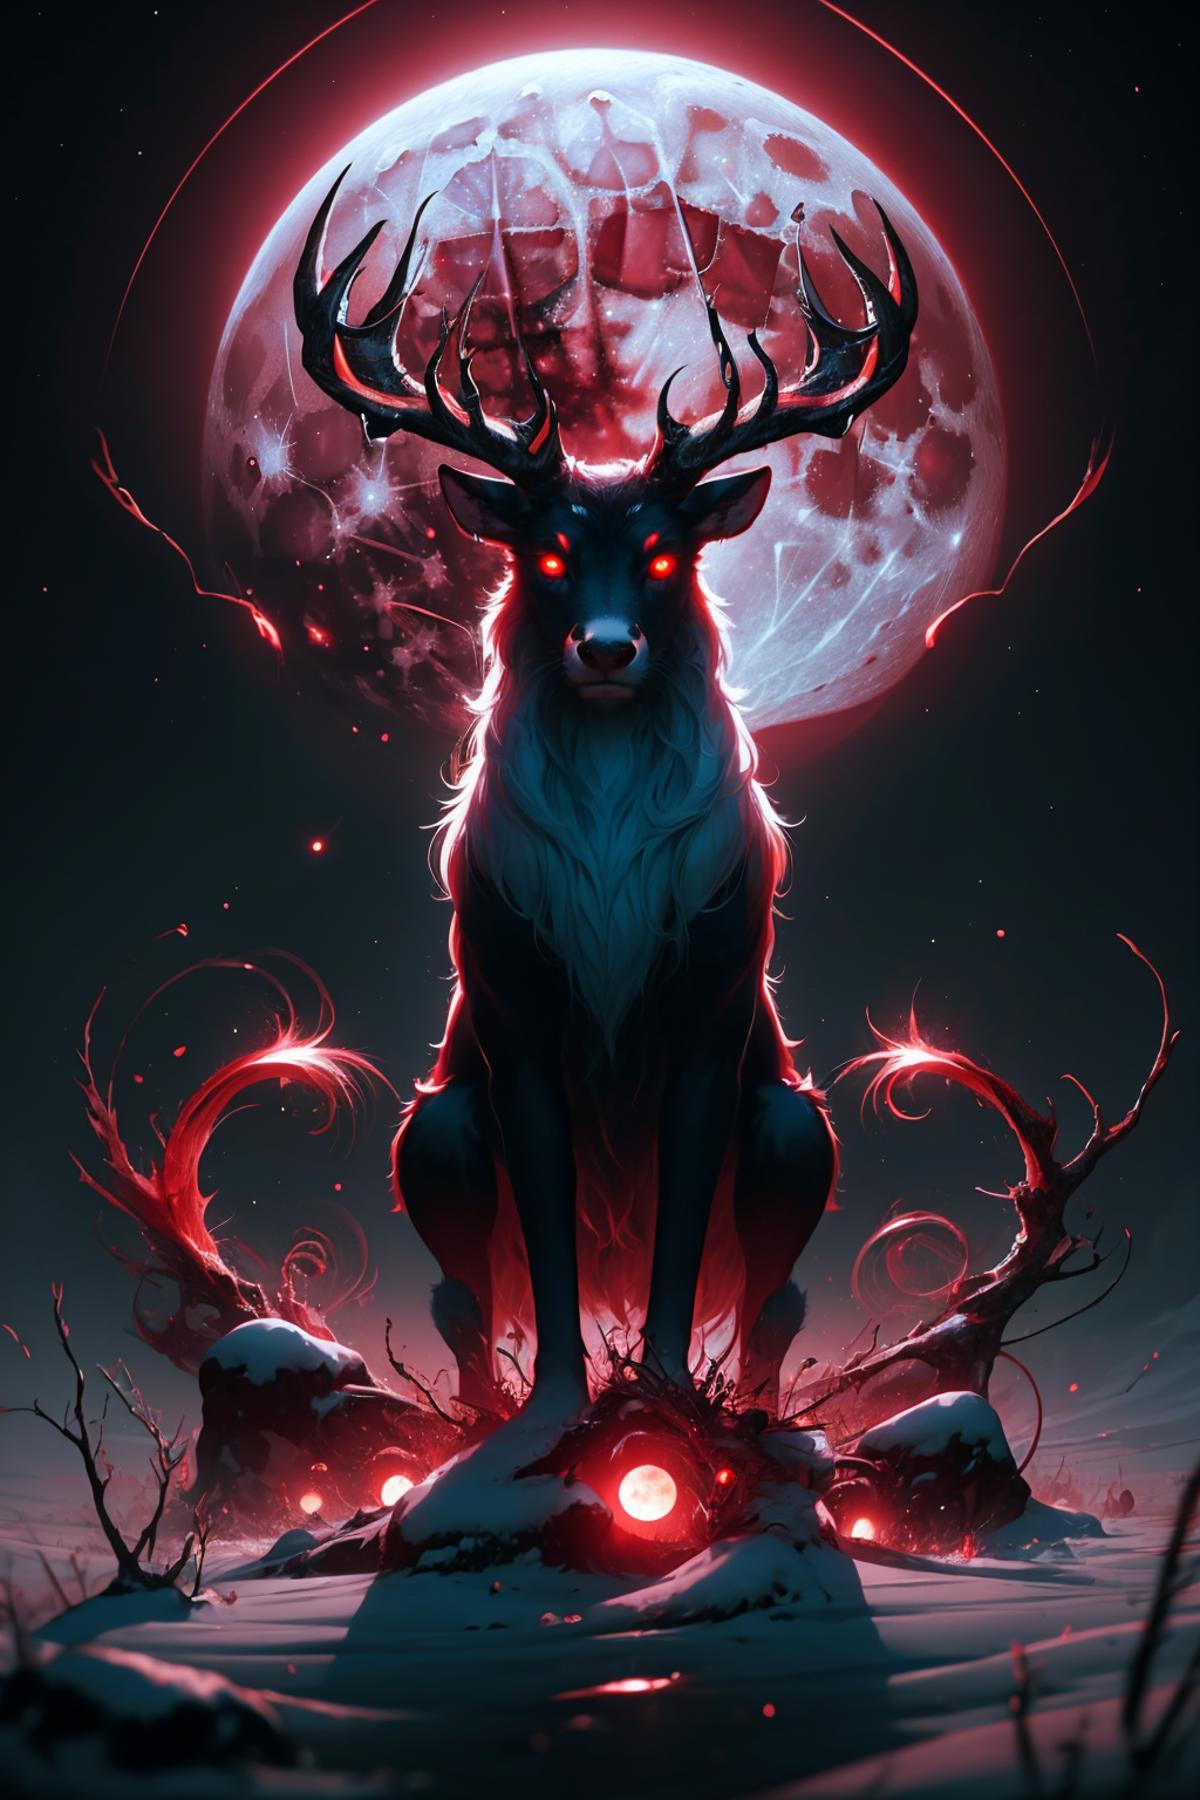 A dark and eerie image of a deer with glowing eyes, standing on a rock with a moon in the background.